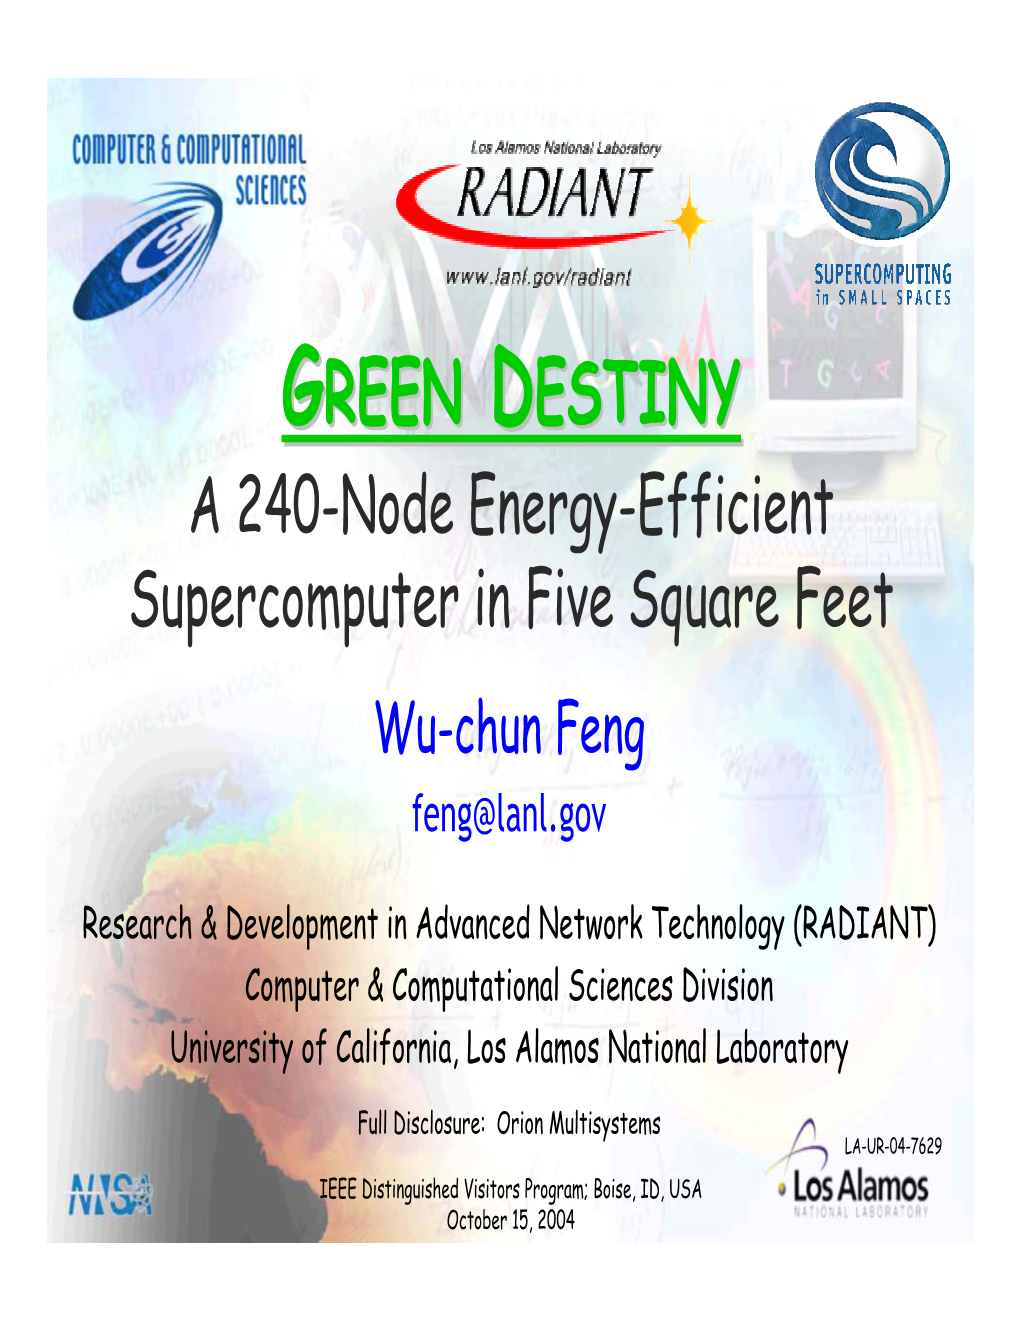 Green Destiny ) Experimental Results ‹ the Evolution of Green Destiny ) Architectural: Orion Multisystems DT-12 ) Software-Based: Caffeine Supercomputer